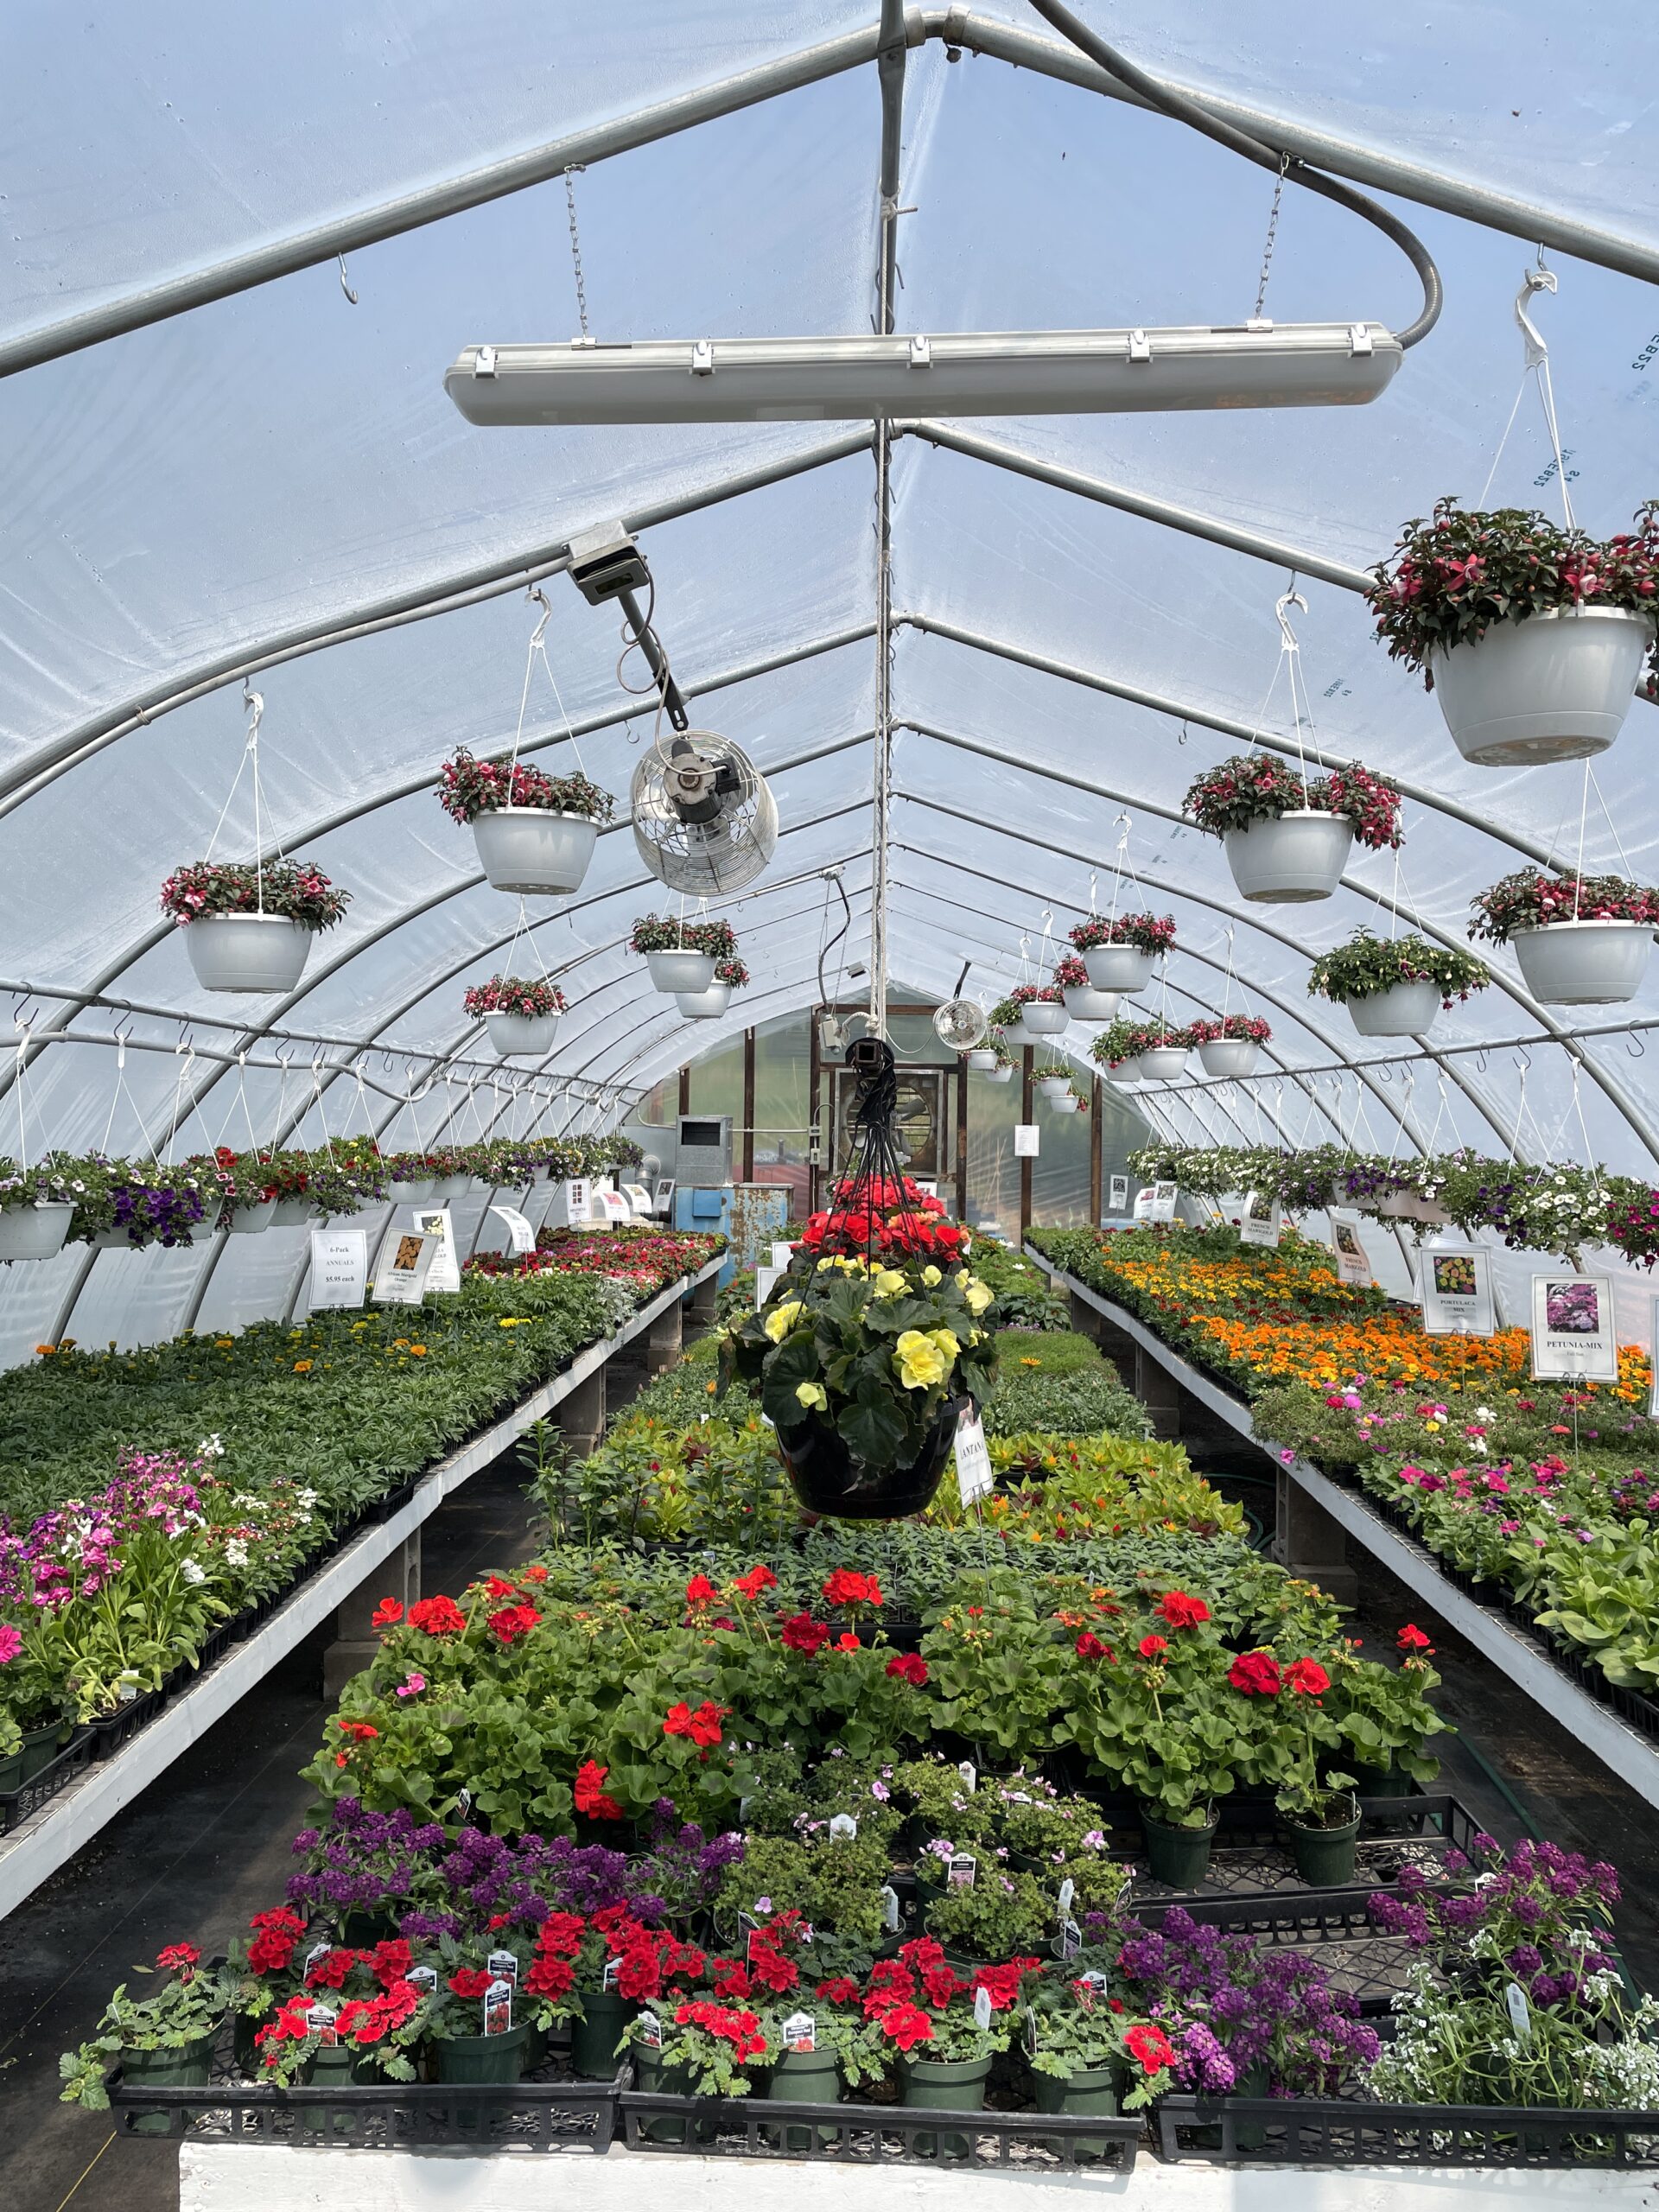 A wide shot looking down three rows of tables in a greenhouse. There are many colourful plants on the tables and in hanging baskets attached to the roof.